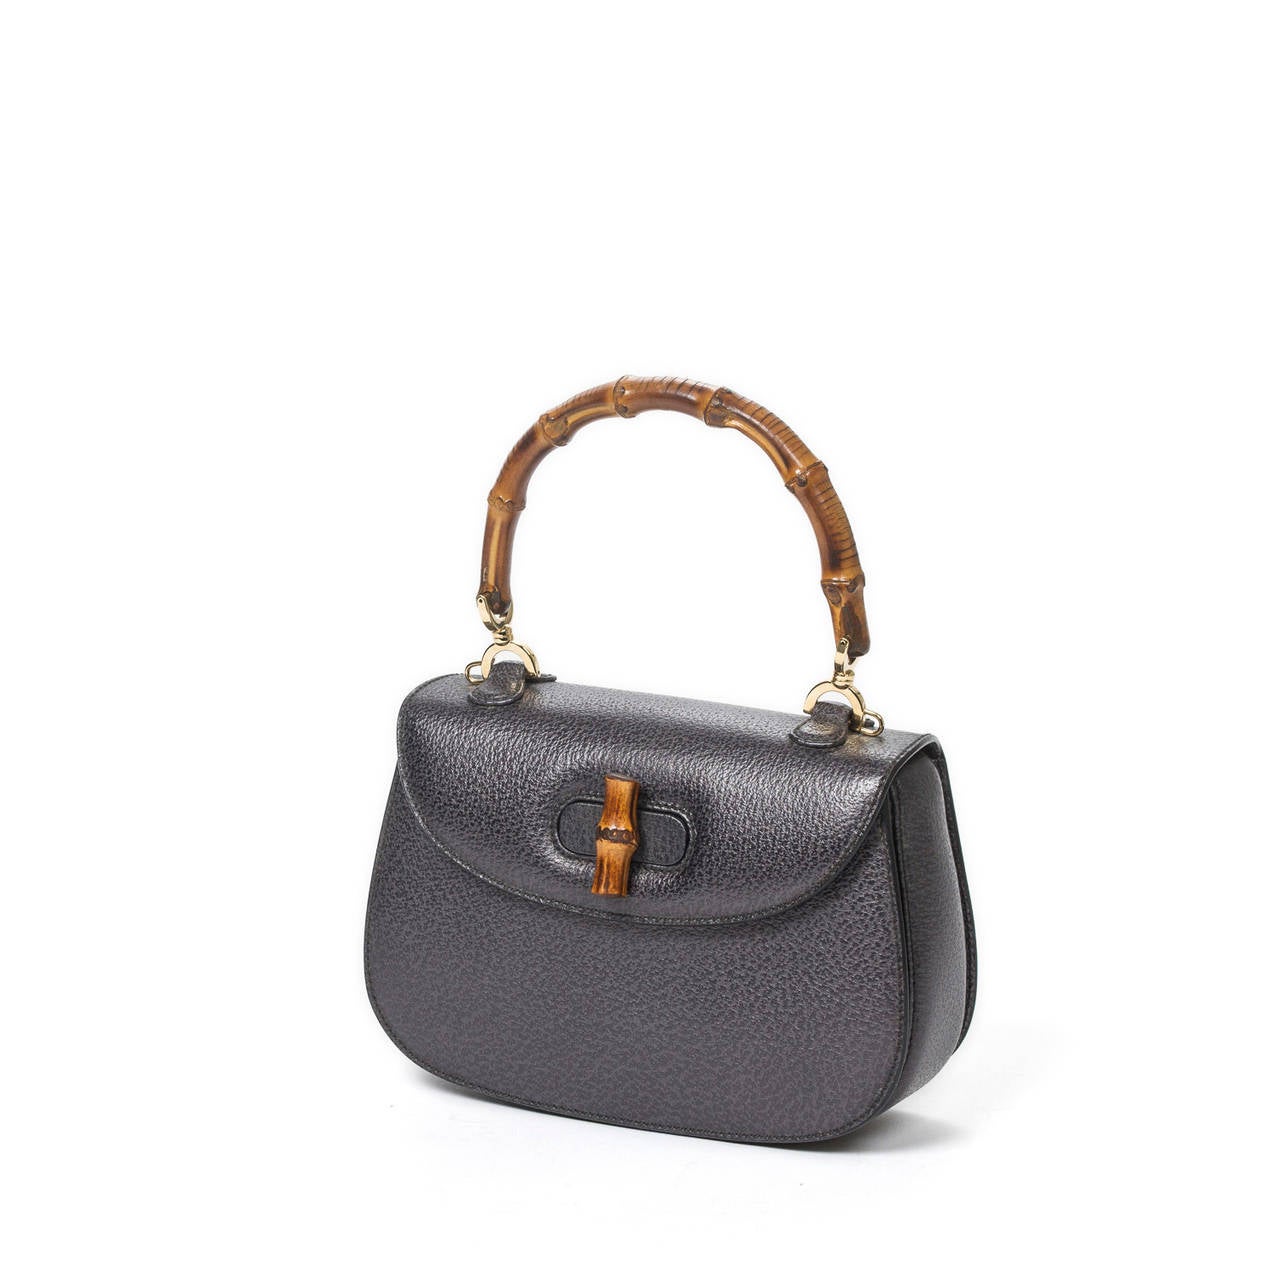 Bamboo handbag in grey grained leather with bamboo handle and leather strap, silver tone hardware. Grey suede leather interior with 3 compartments which one is zipped. Brand new condition.